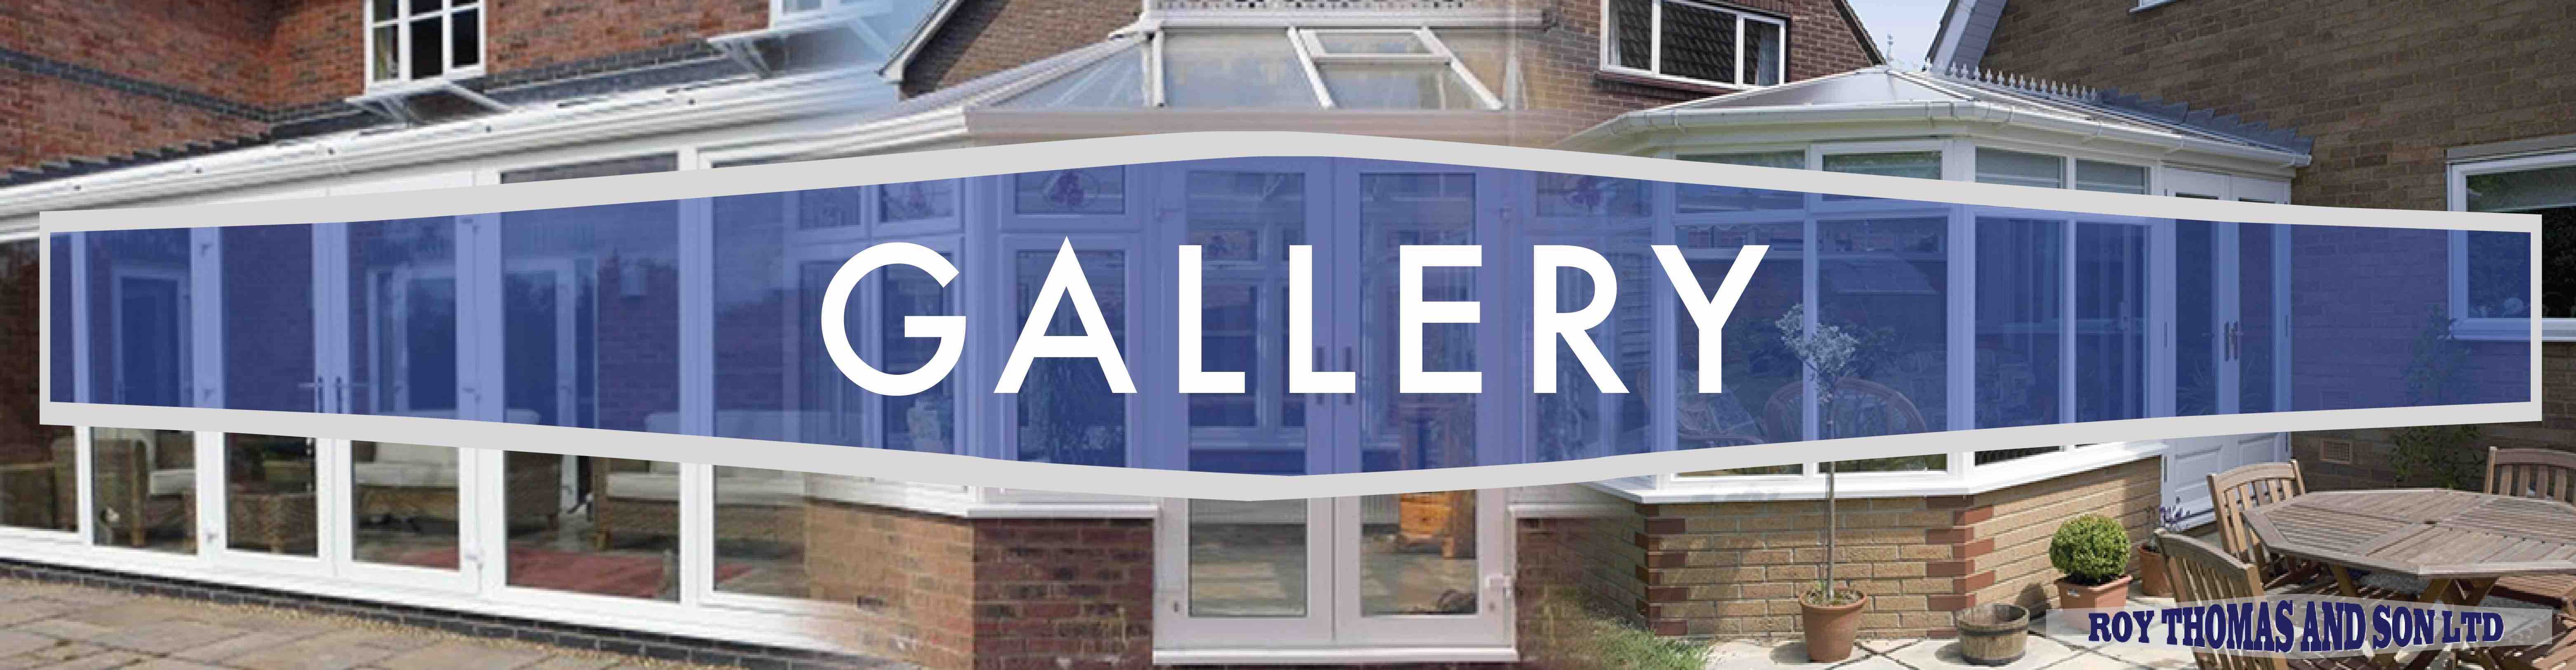 Roy-Thomas-and-Sons-Gallery-Banner-Window-Door-Conservatory-Services-copy